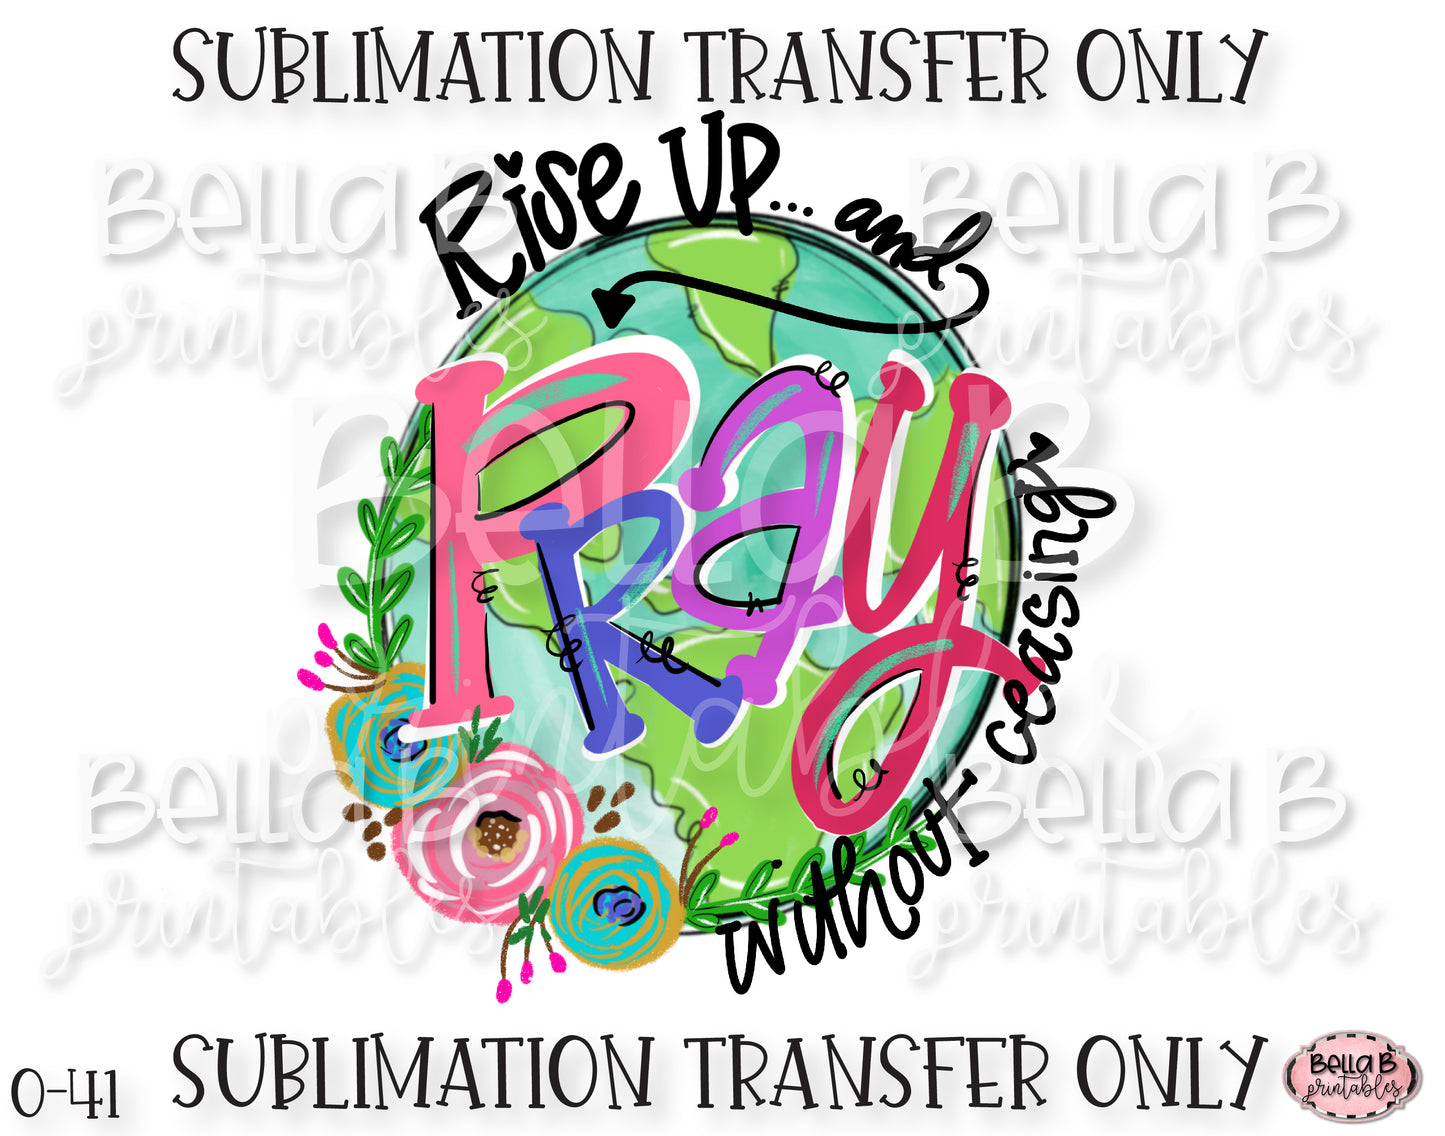 Rise Up and Pray Without Ceasing Sublimation Transfer, Ready To Press, Heat Press Transfer, Sublimation Print